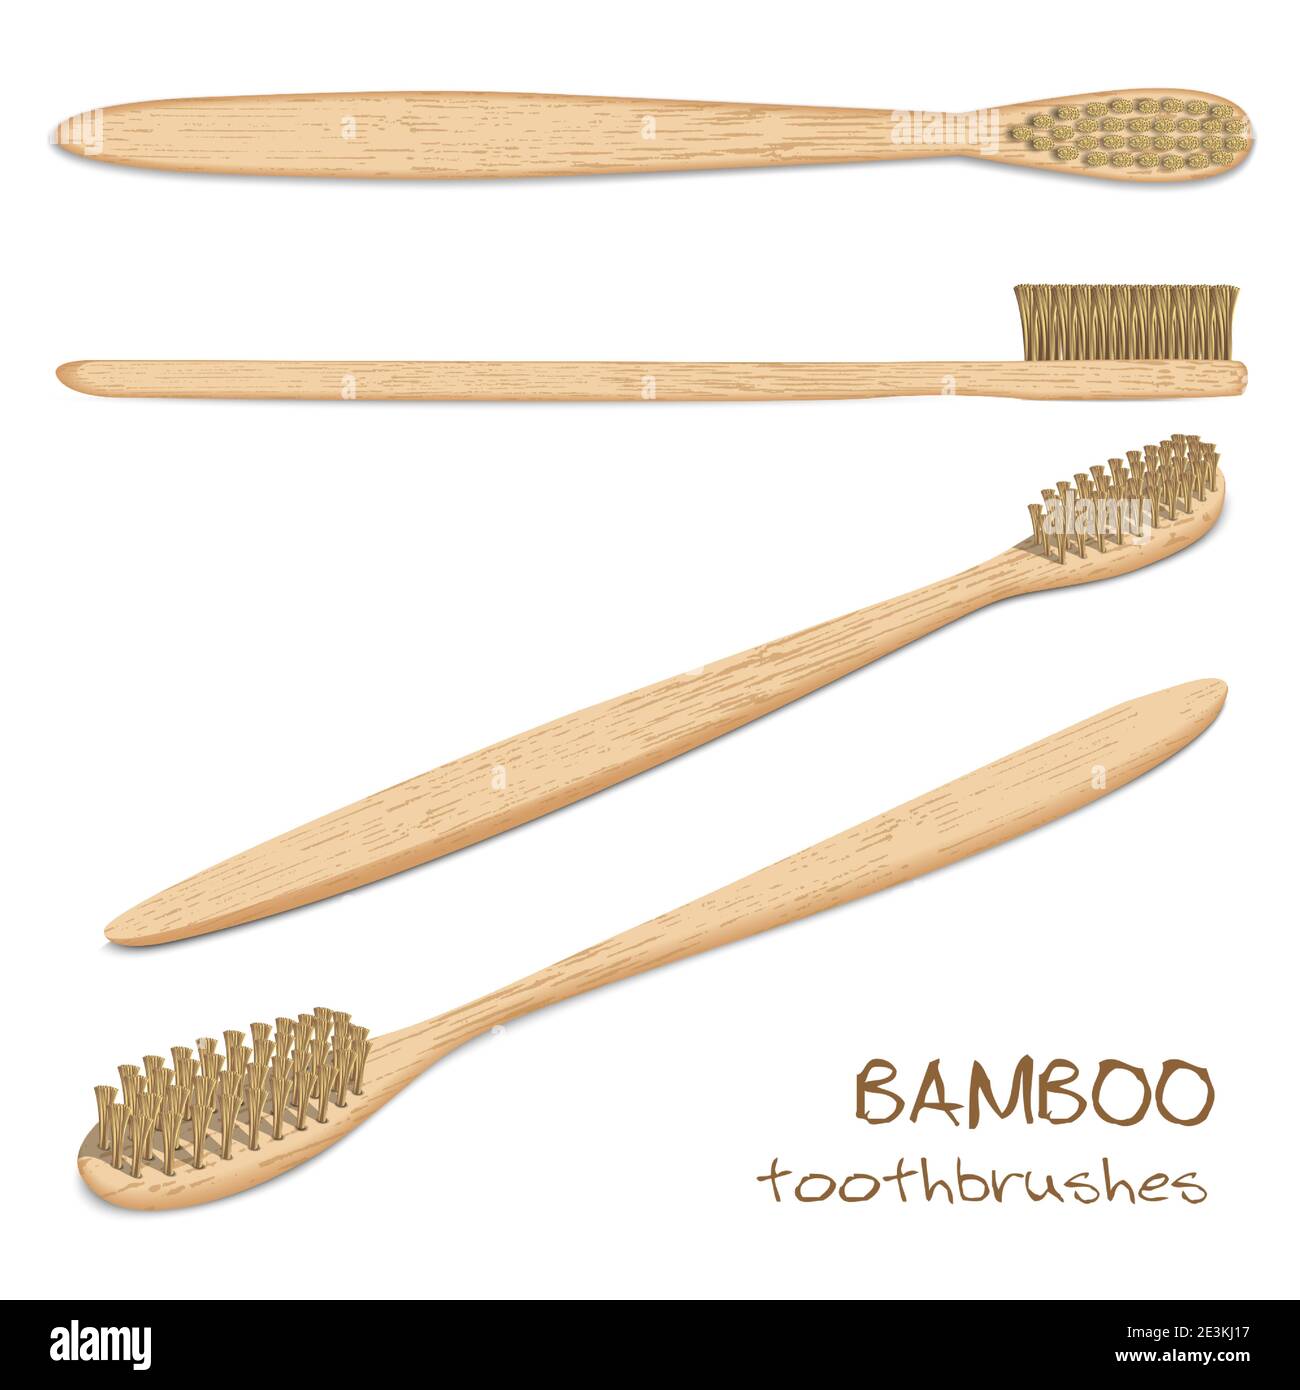 Bamboo toothbrushes. Varicoloured, natural bristle. Zero waste, Biodegradable material. Eco-friendly products. Isolated on white background. Stock Vector